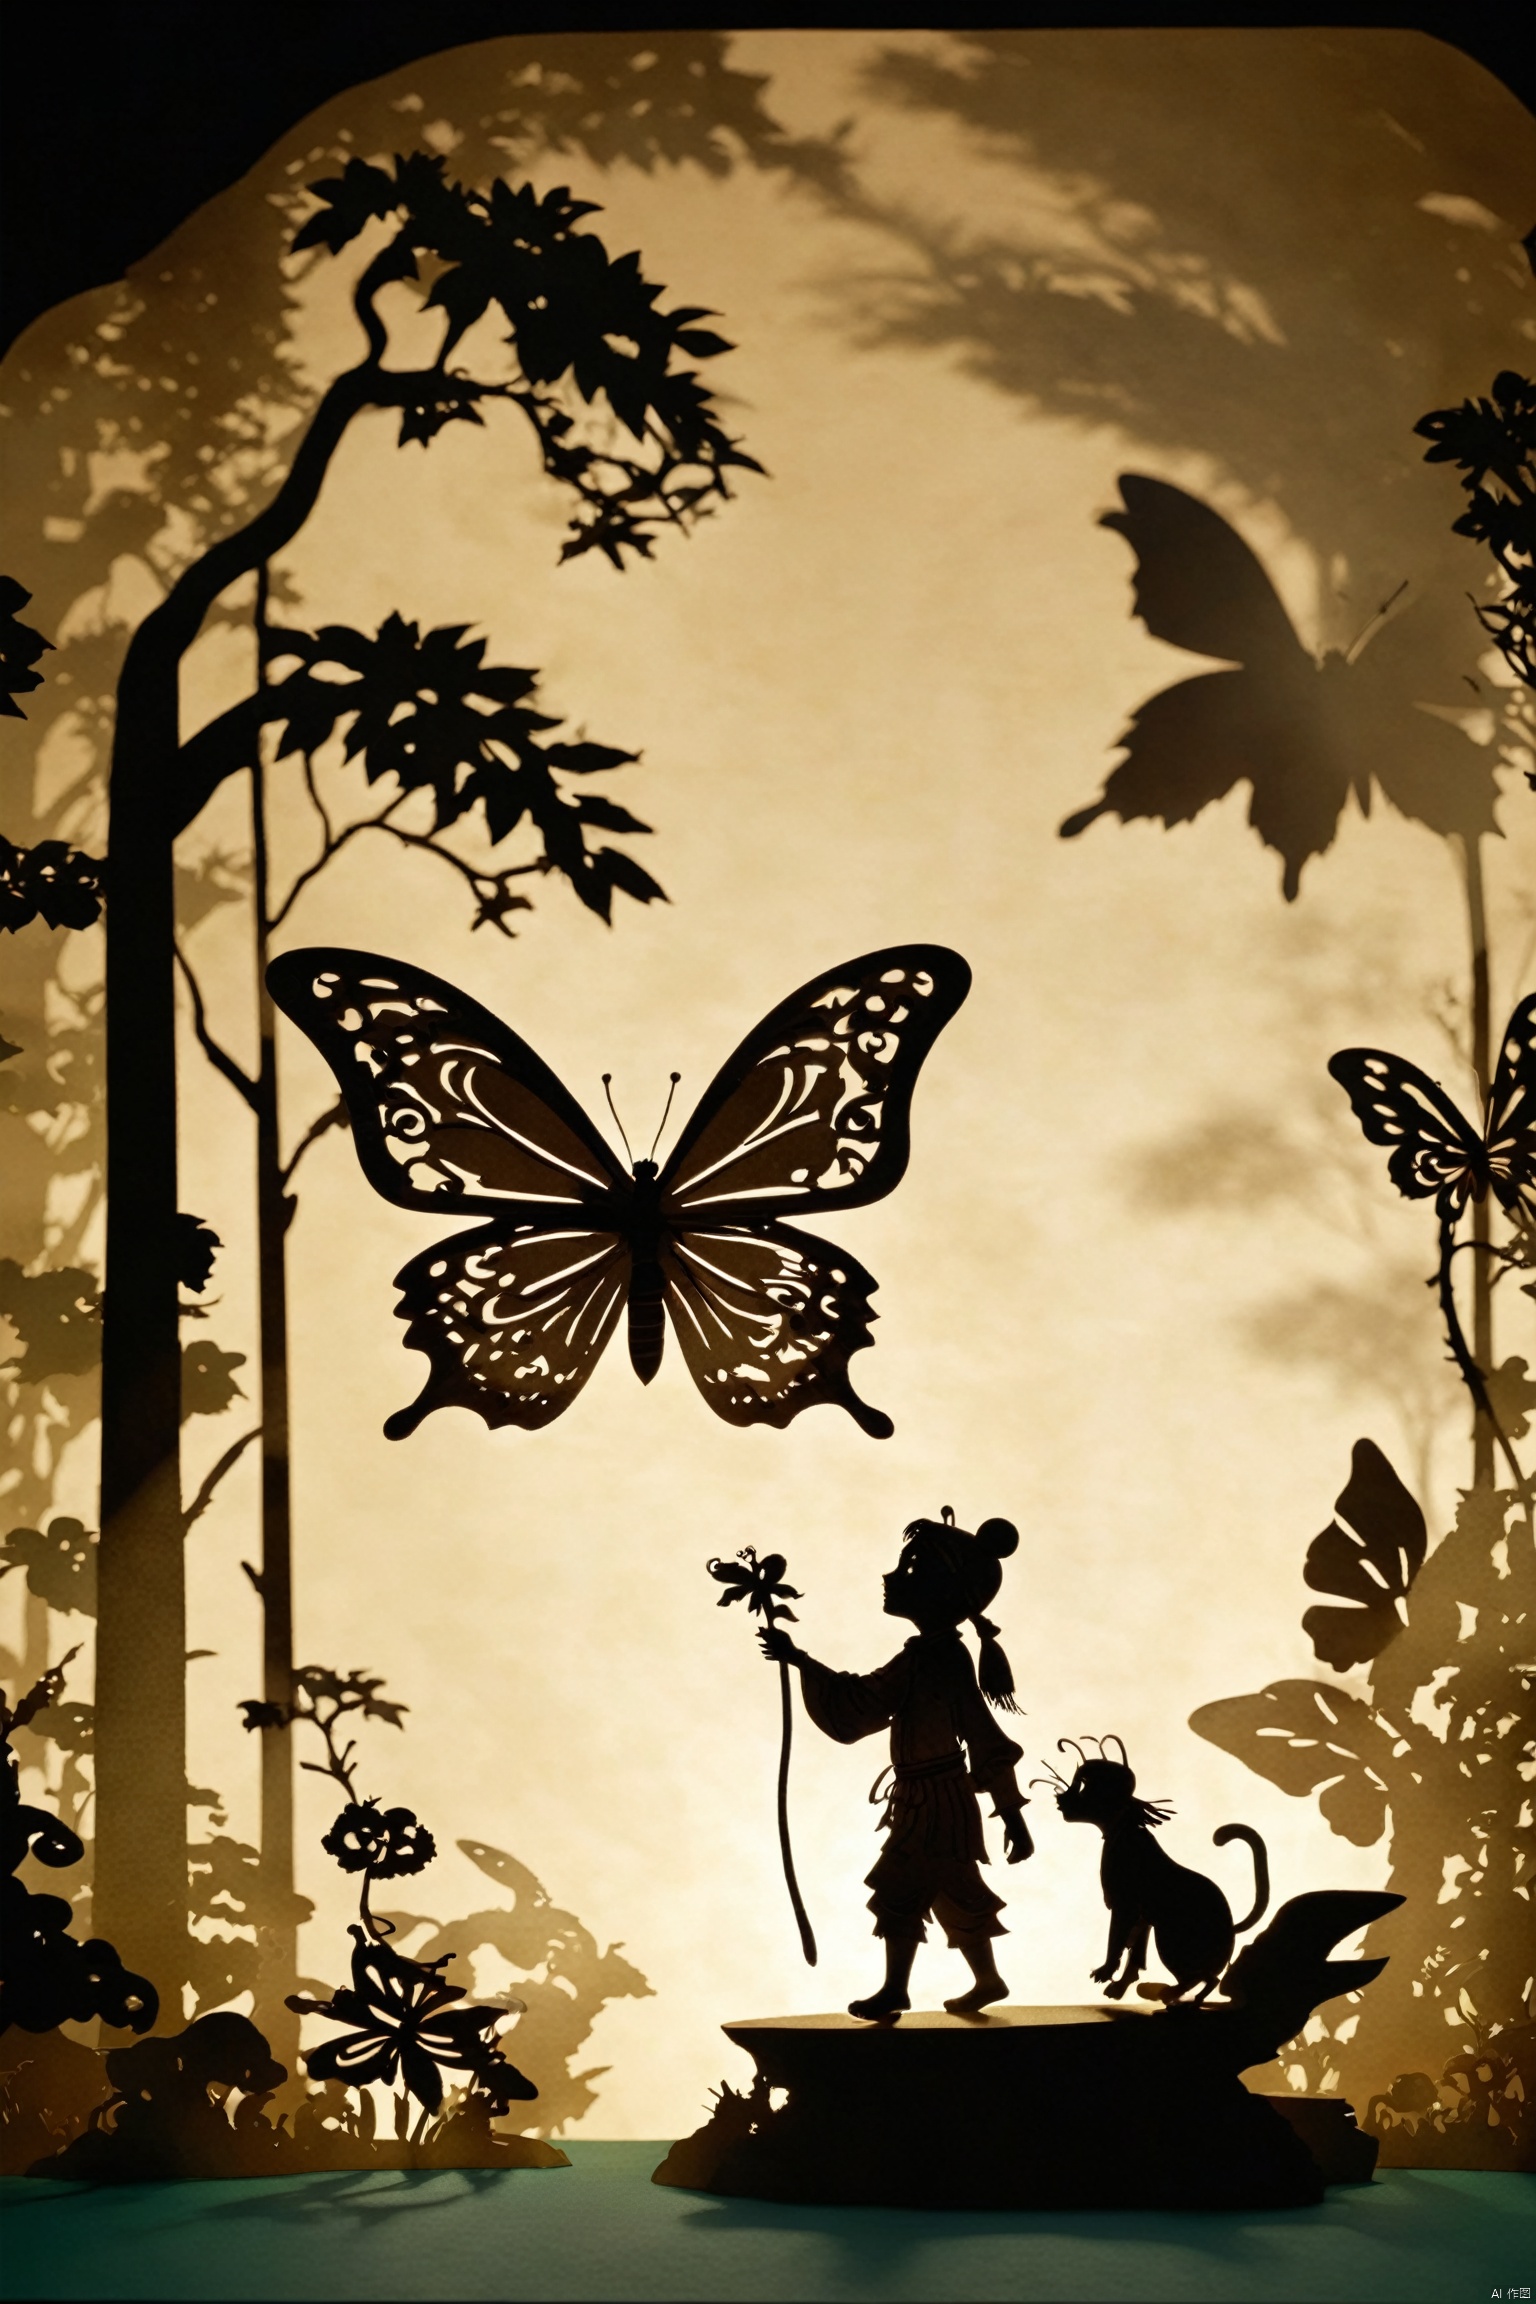 Pivot photography, The Jungle Book, Shadow Figure, Butterfly, 3D, C4D, Silhouette, Backlight, Center Glow, Shadow Play, Dark Magic